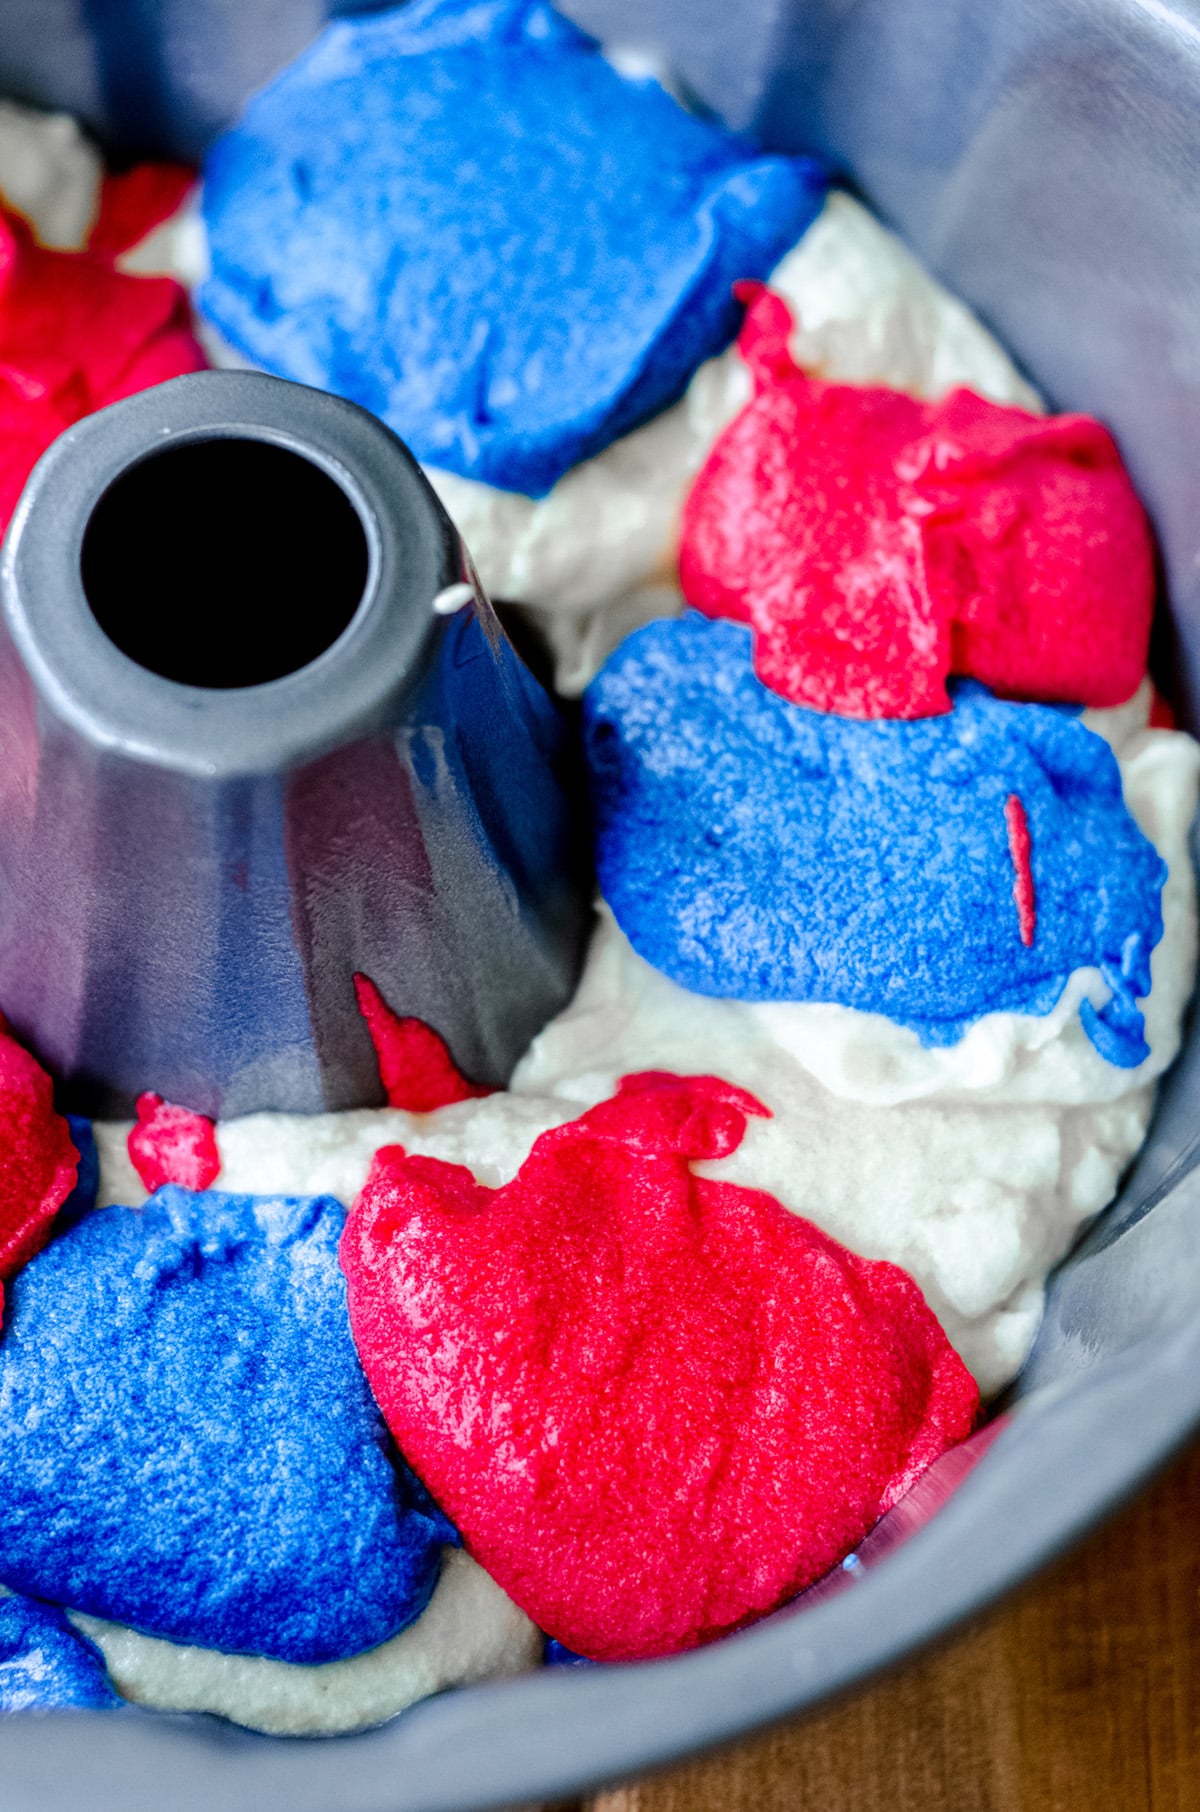 red white and blue swirl cake batter in a bundt pan